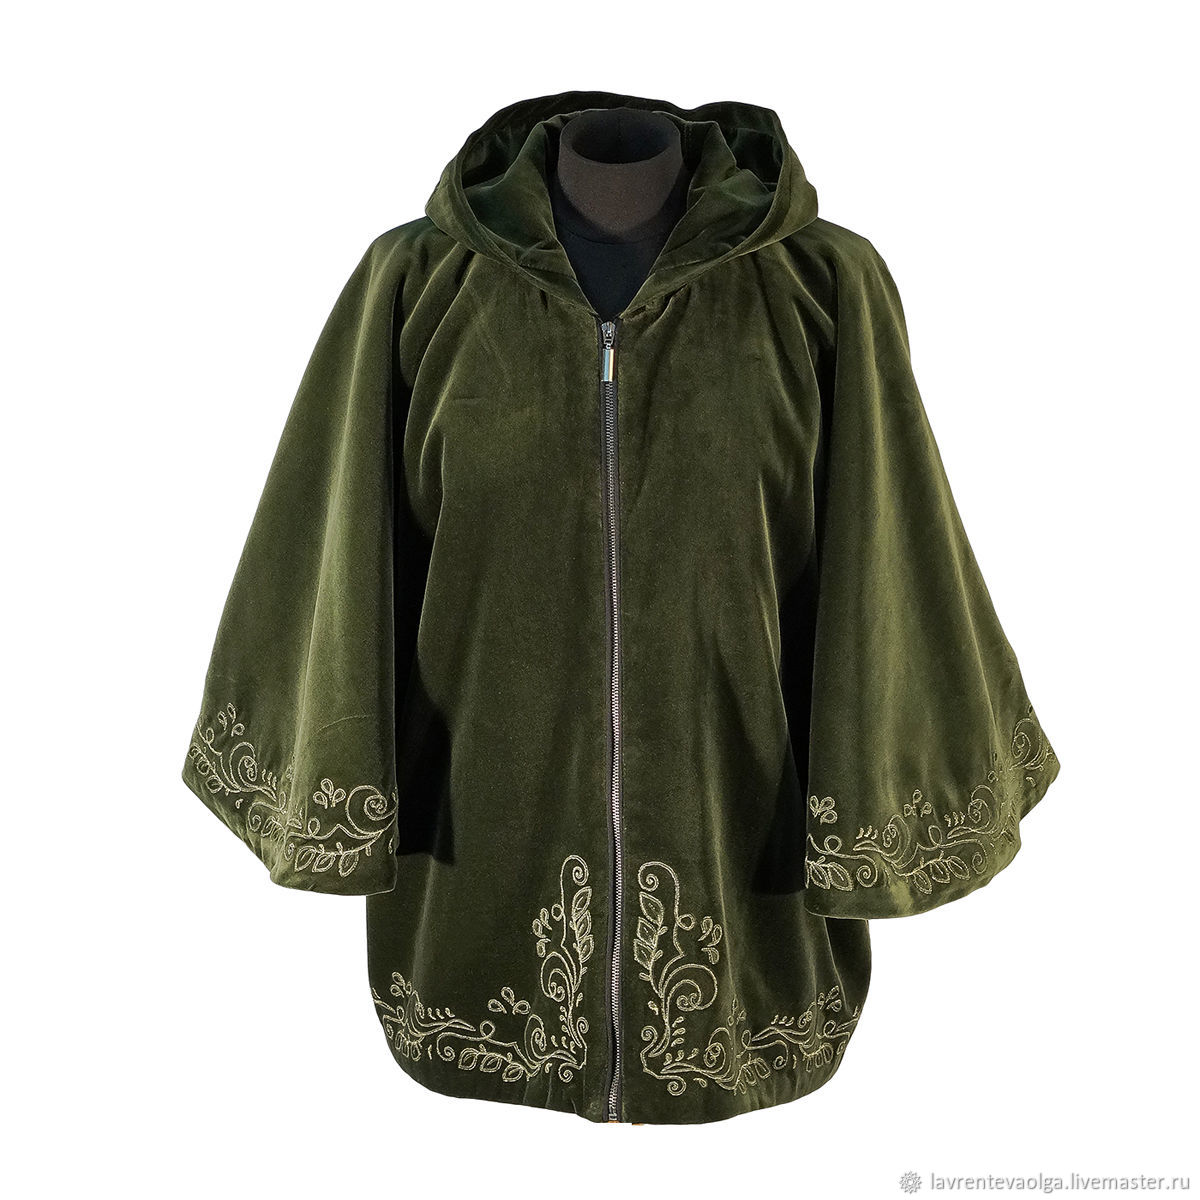 Velvet jacket Avtoledi with exclusive embroidery with gold thread, Ponchos, Moscow,  Фото №1